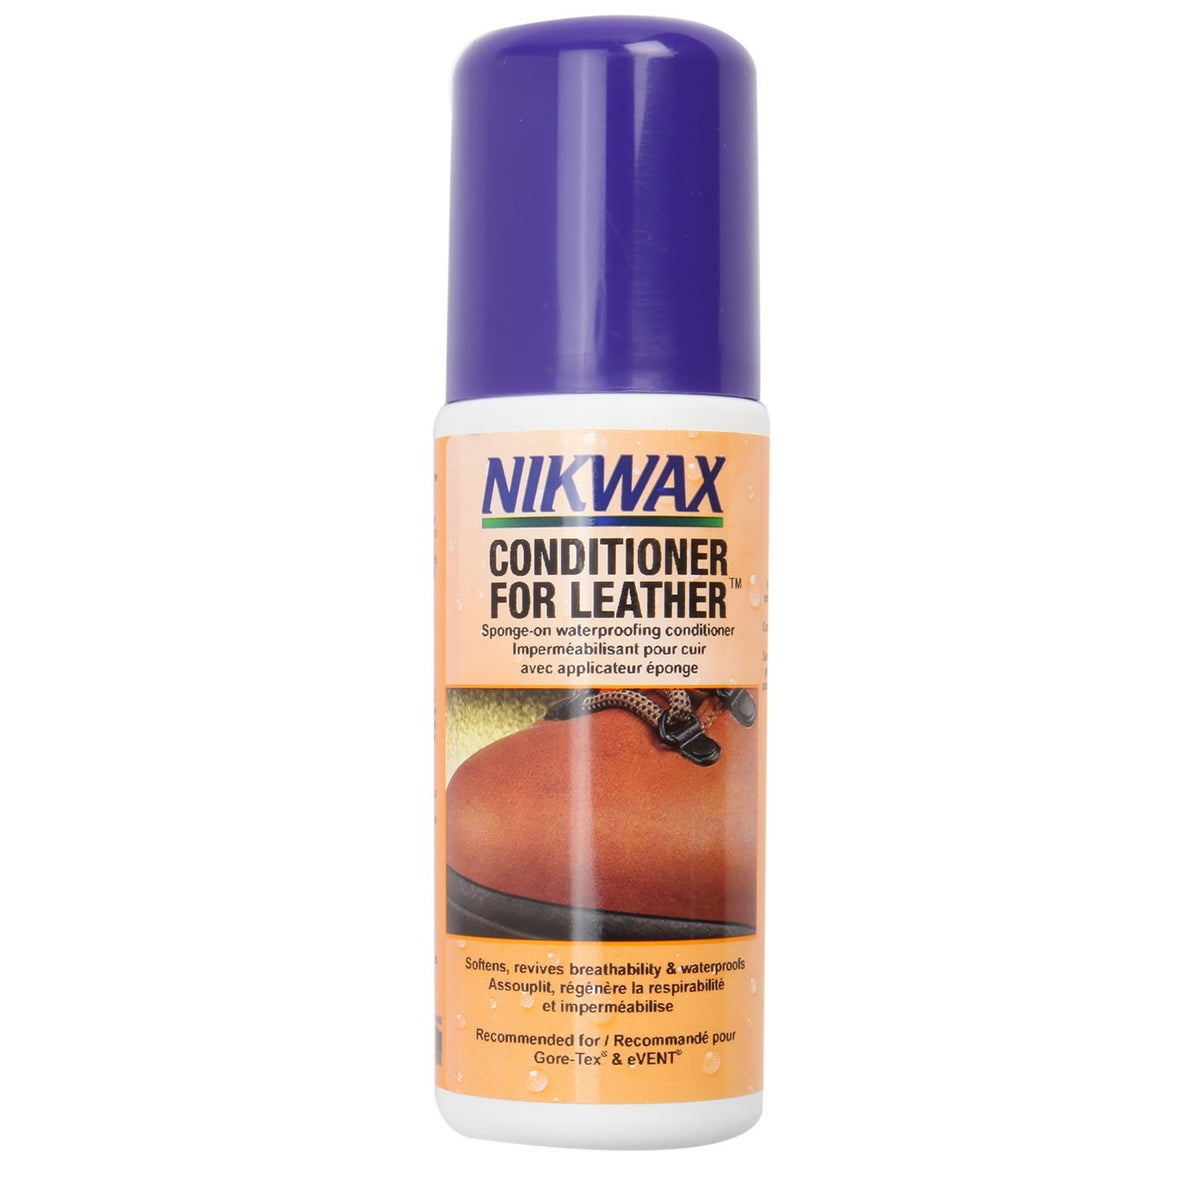 Nikwax Conditioner For Leather Waterproofing